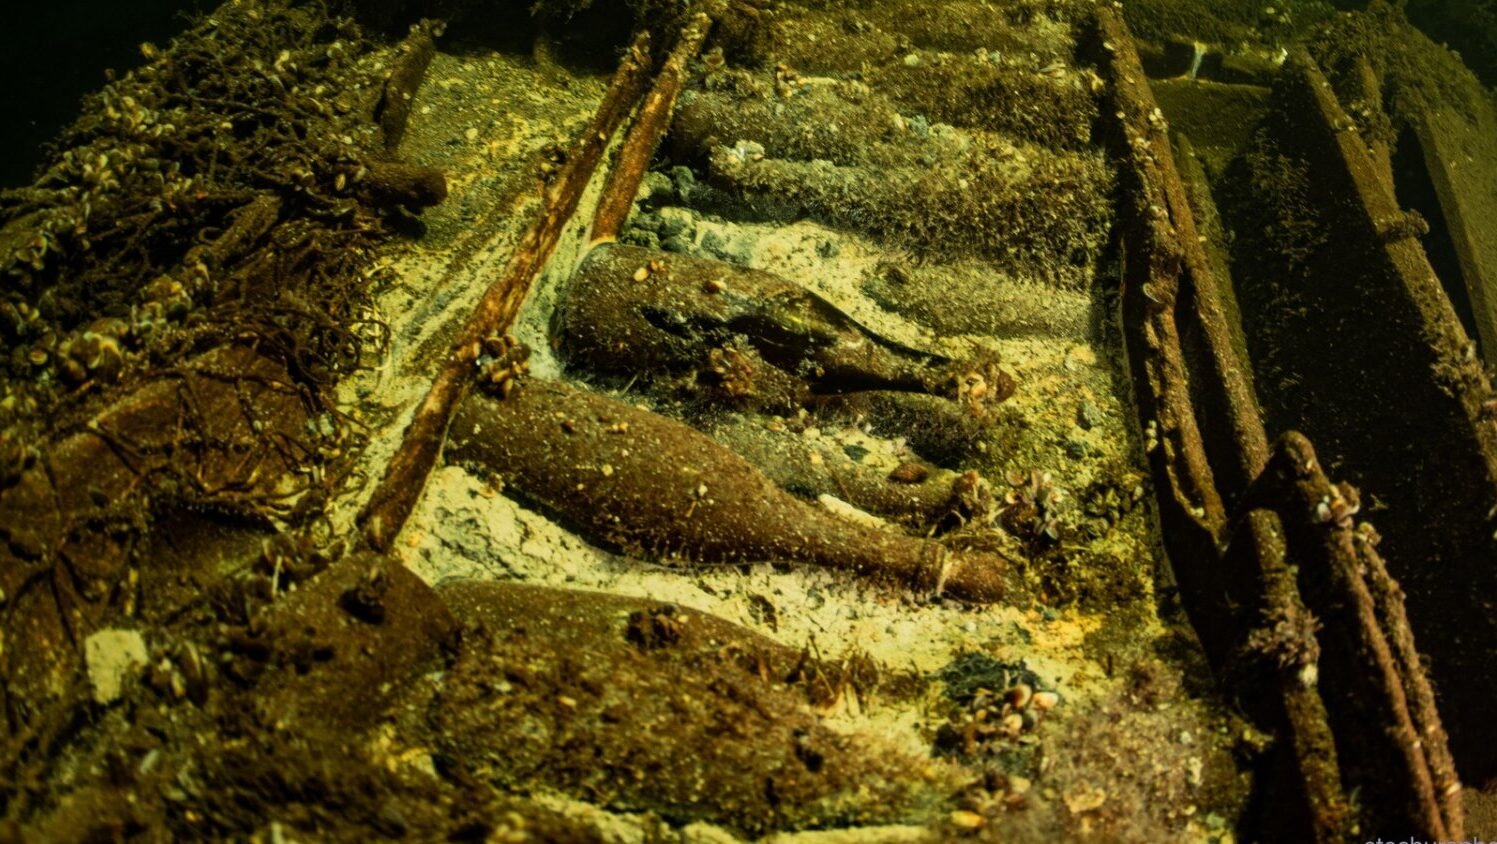 Over 100 Uncorked Champagne Bottles Found in 170-Year-Old Shipwreck